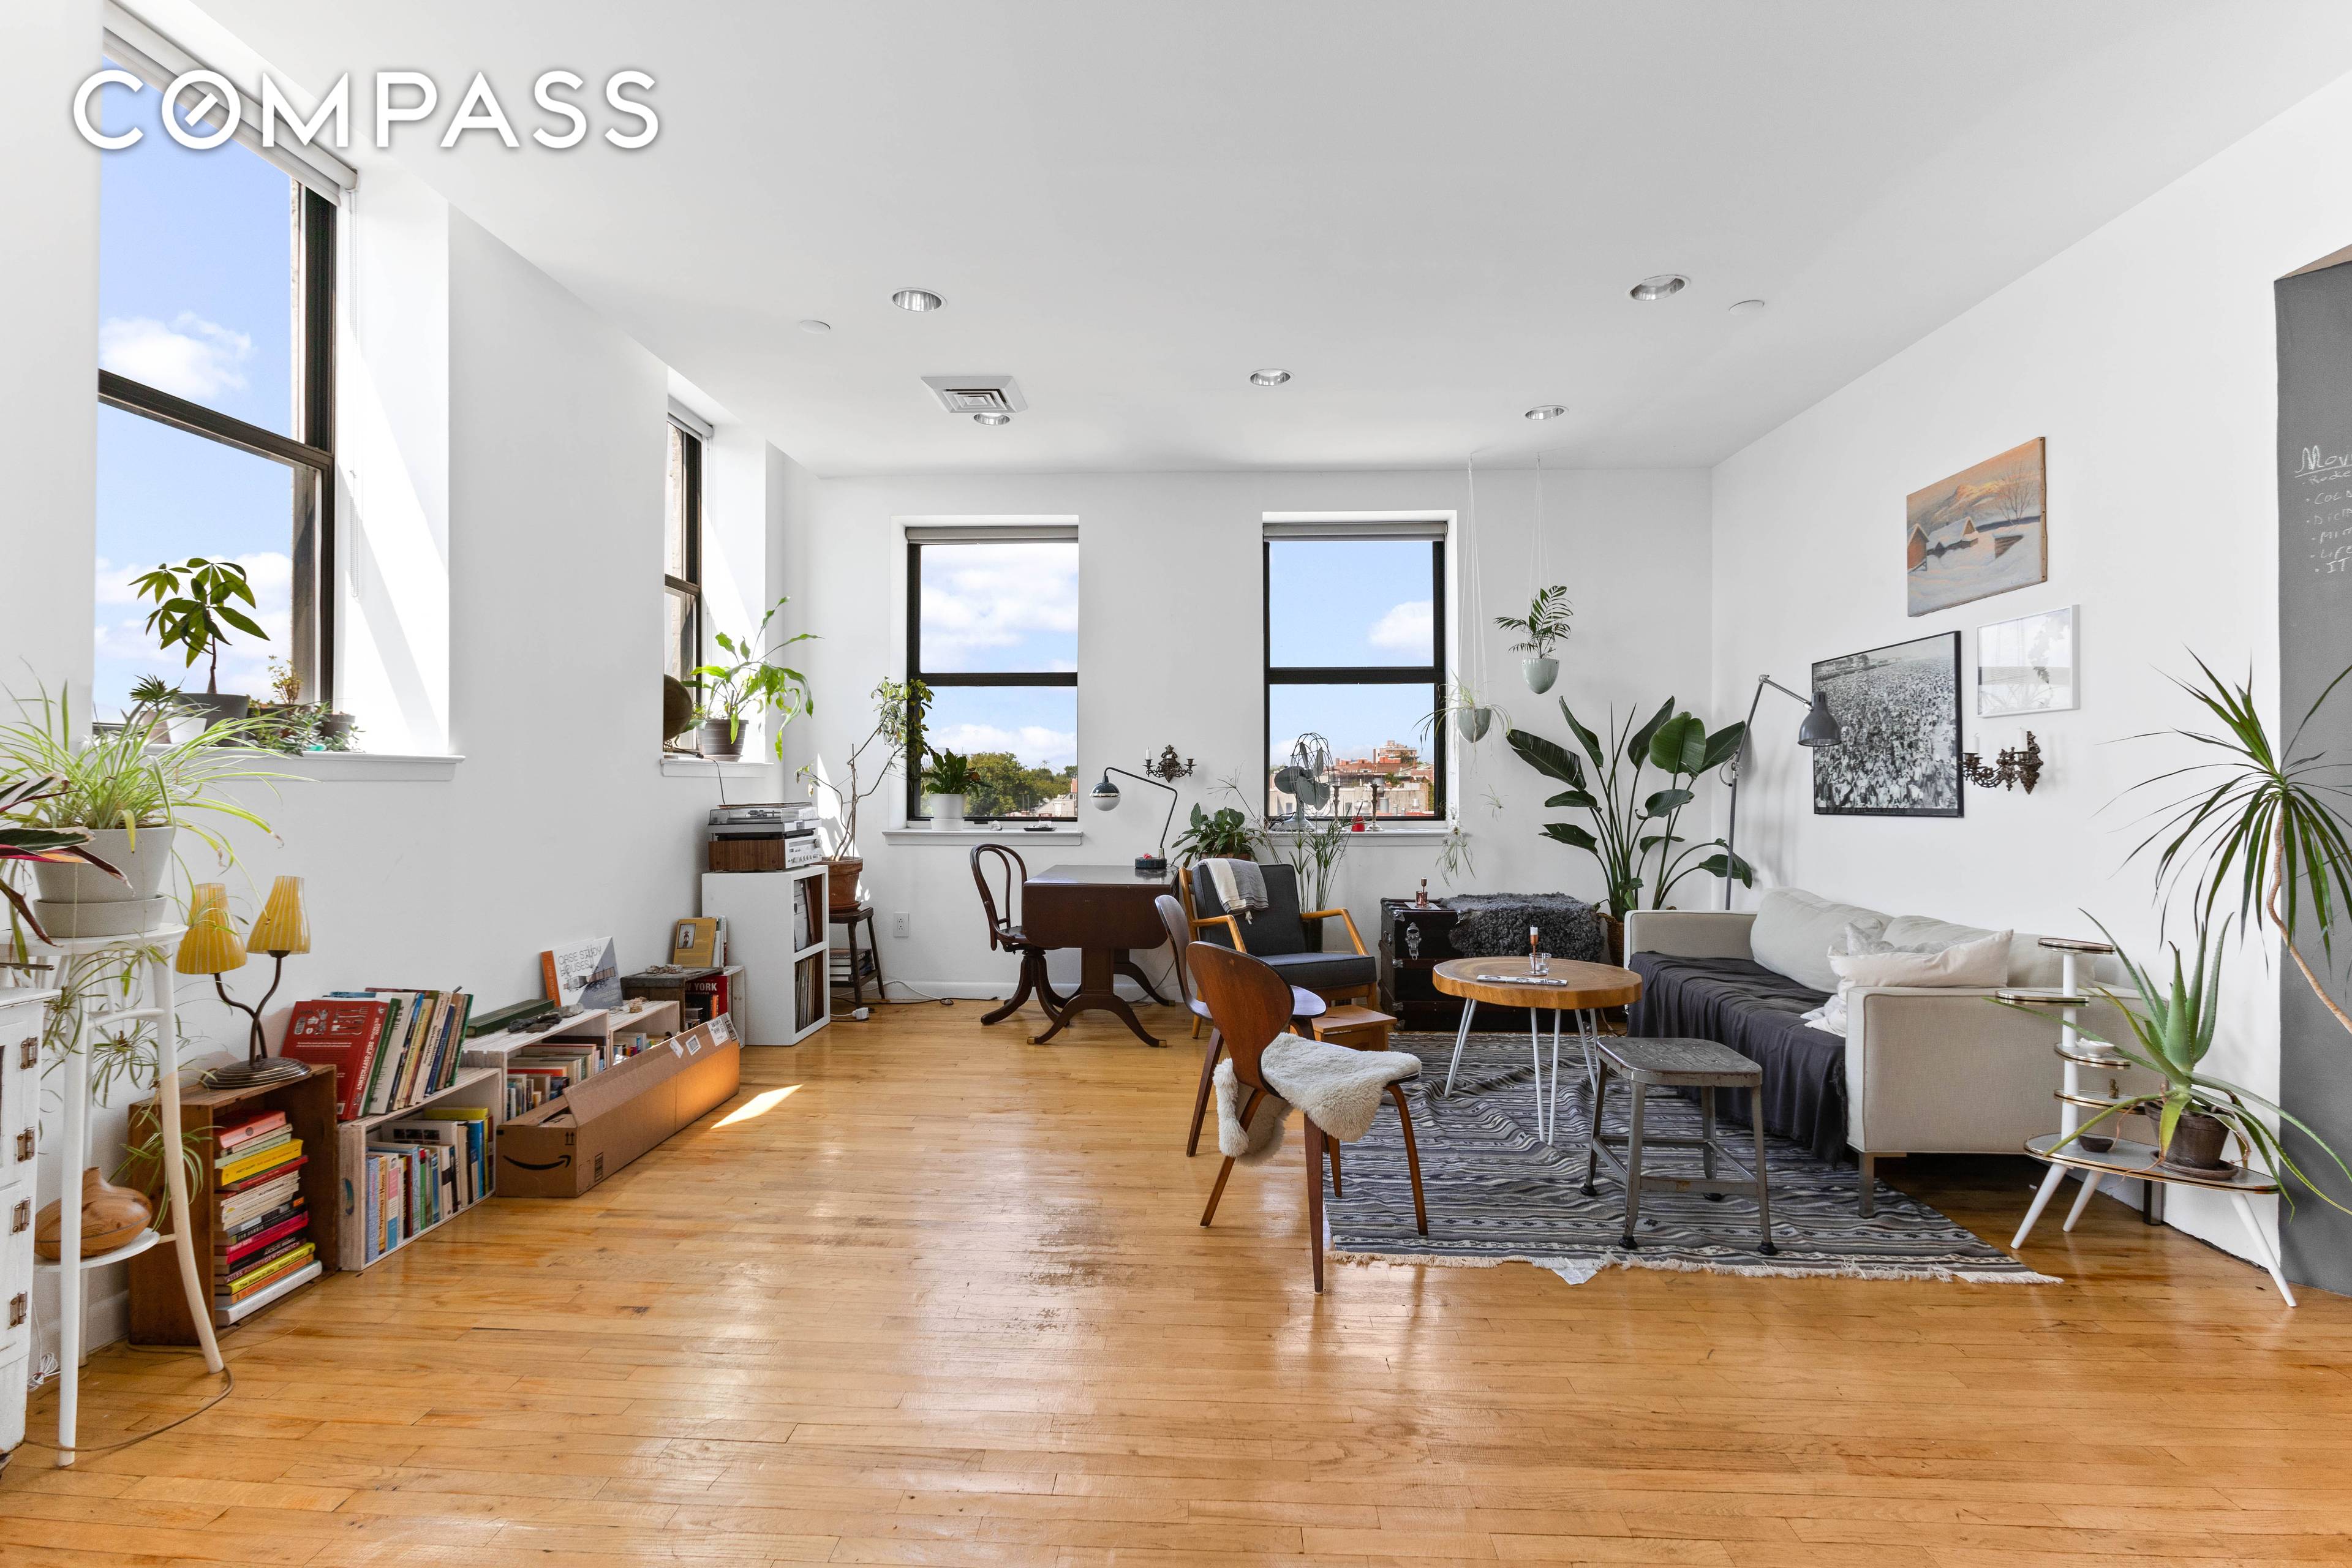 One free on 12 4300 gross No dogs allowed Exceptional, one of a kind, Furniture Factory Condo Loft located just off Smith Street at the Cobble Hill Boerum Hill border ...